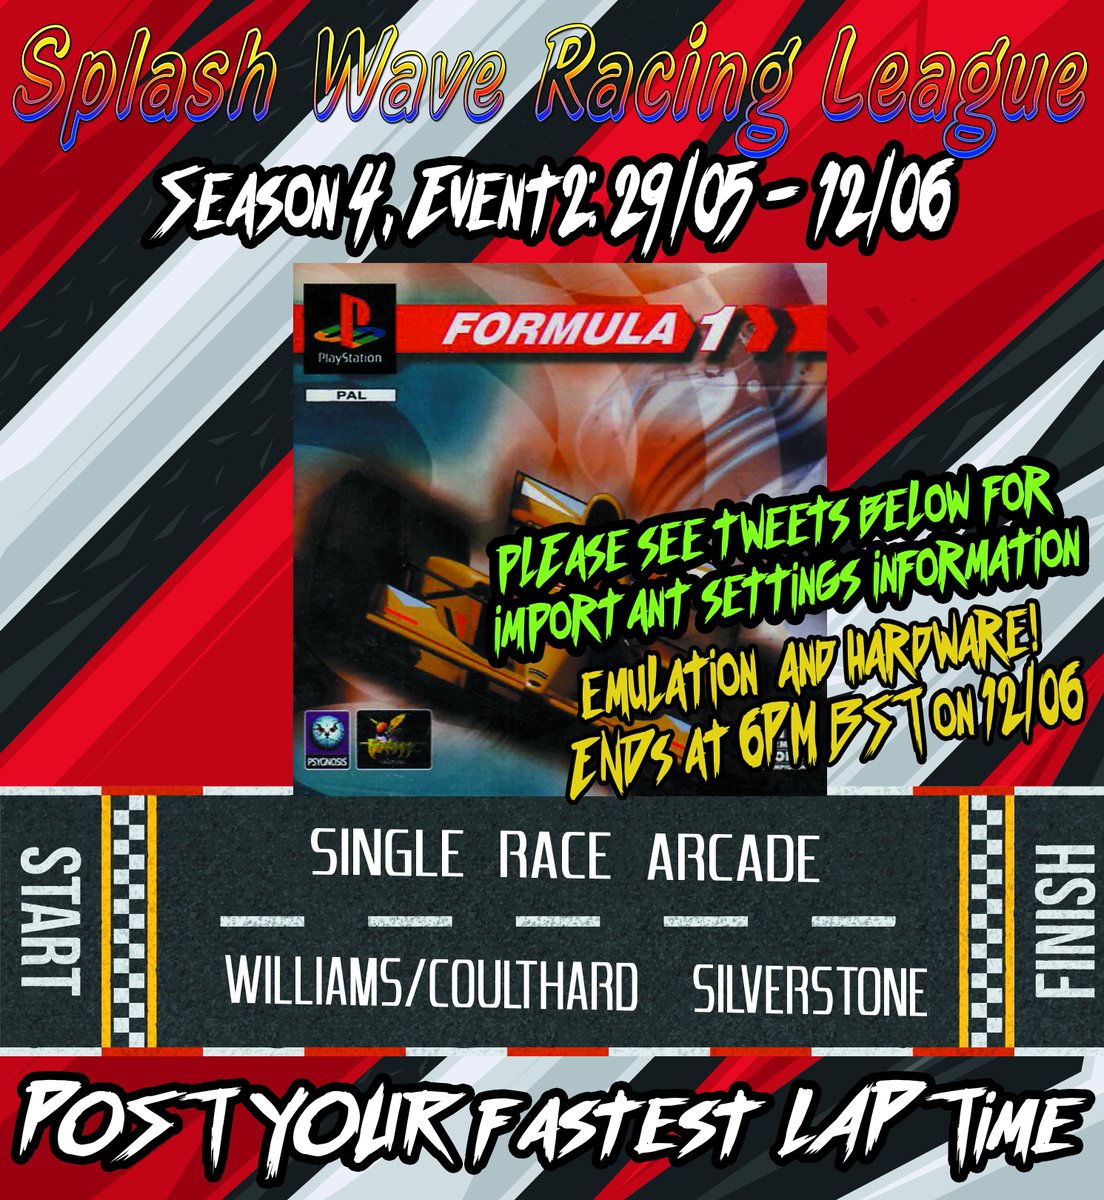 For our next challenge, we're winding the clock back to the 1995 Grand Prix and heading to Silverstone for some Superb Owl Formula 1 racing! 🏁#SPLASHWAVERACING LEAGUE 🏁 This is a hi-score challenge for racers! Nothing serious, just flavour in the name! 1/3